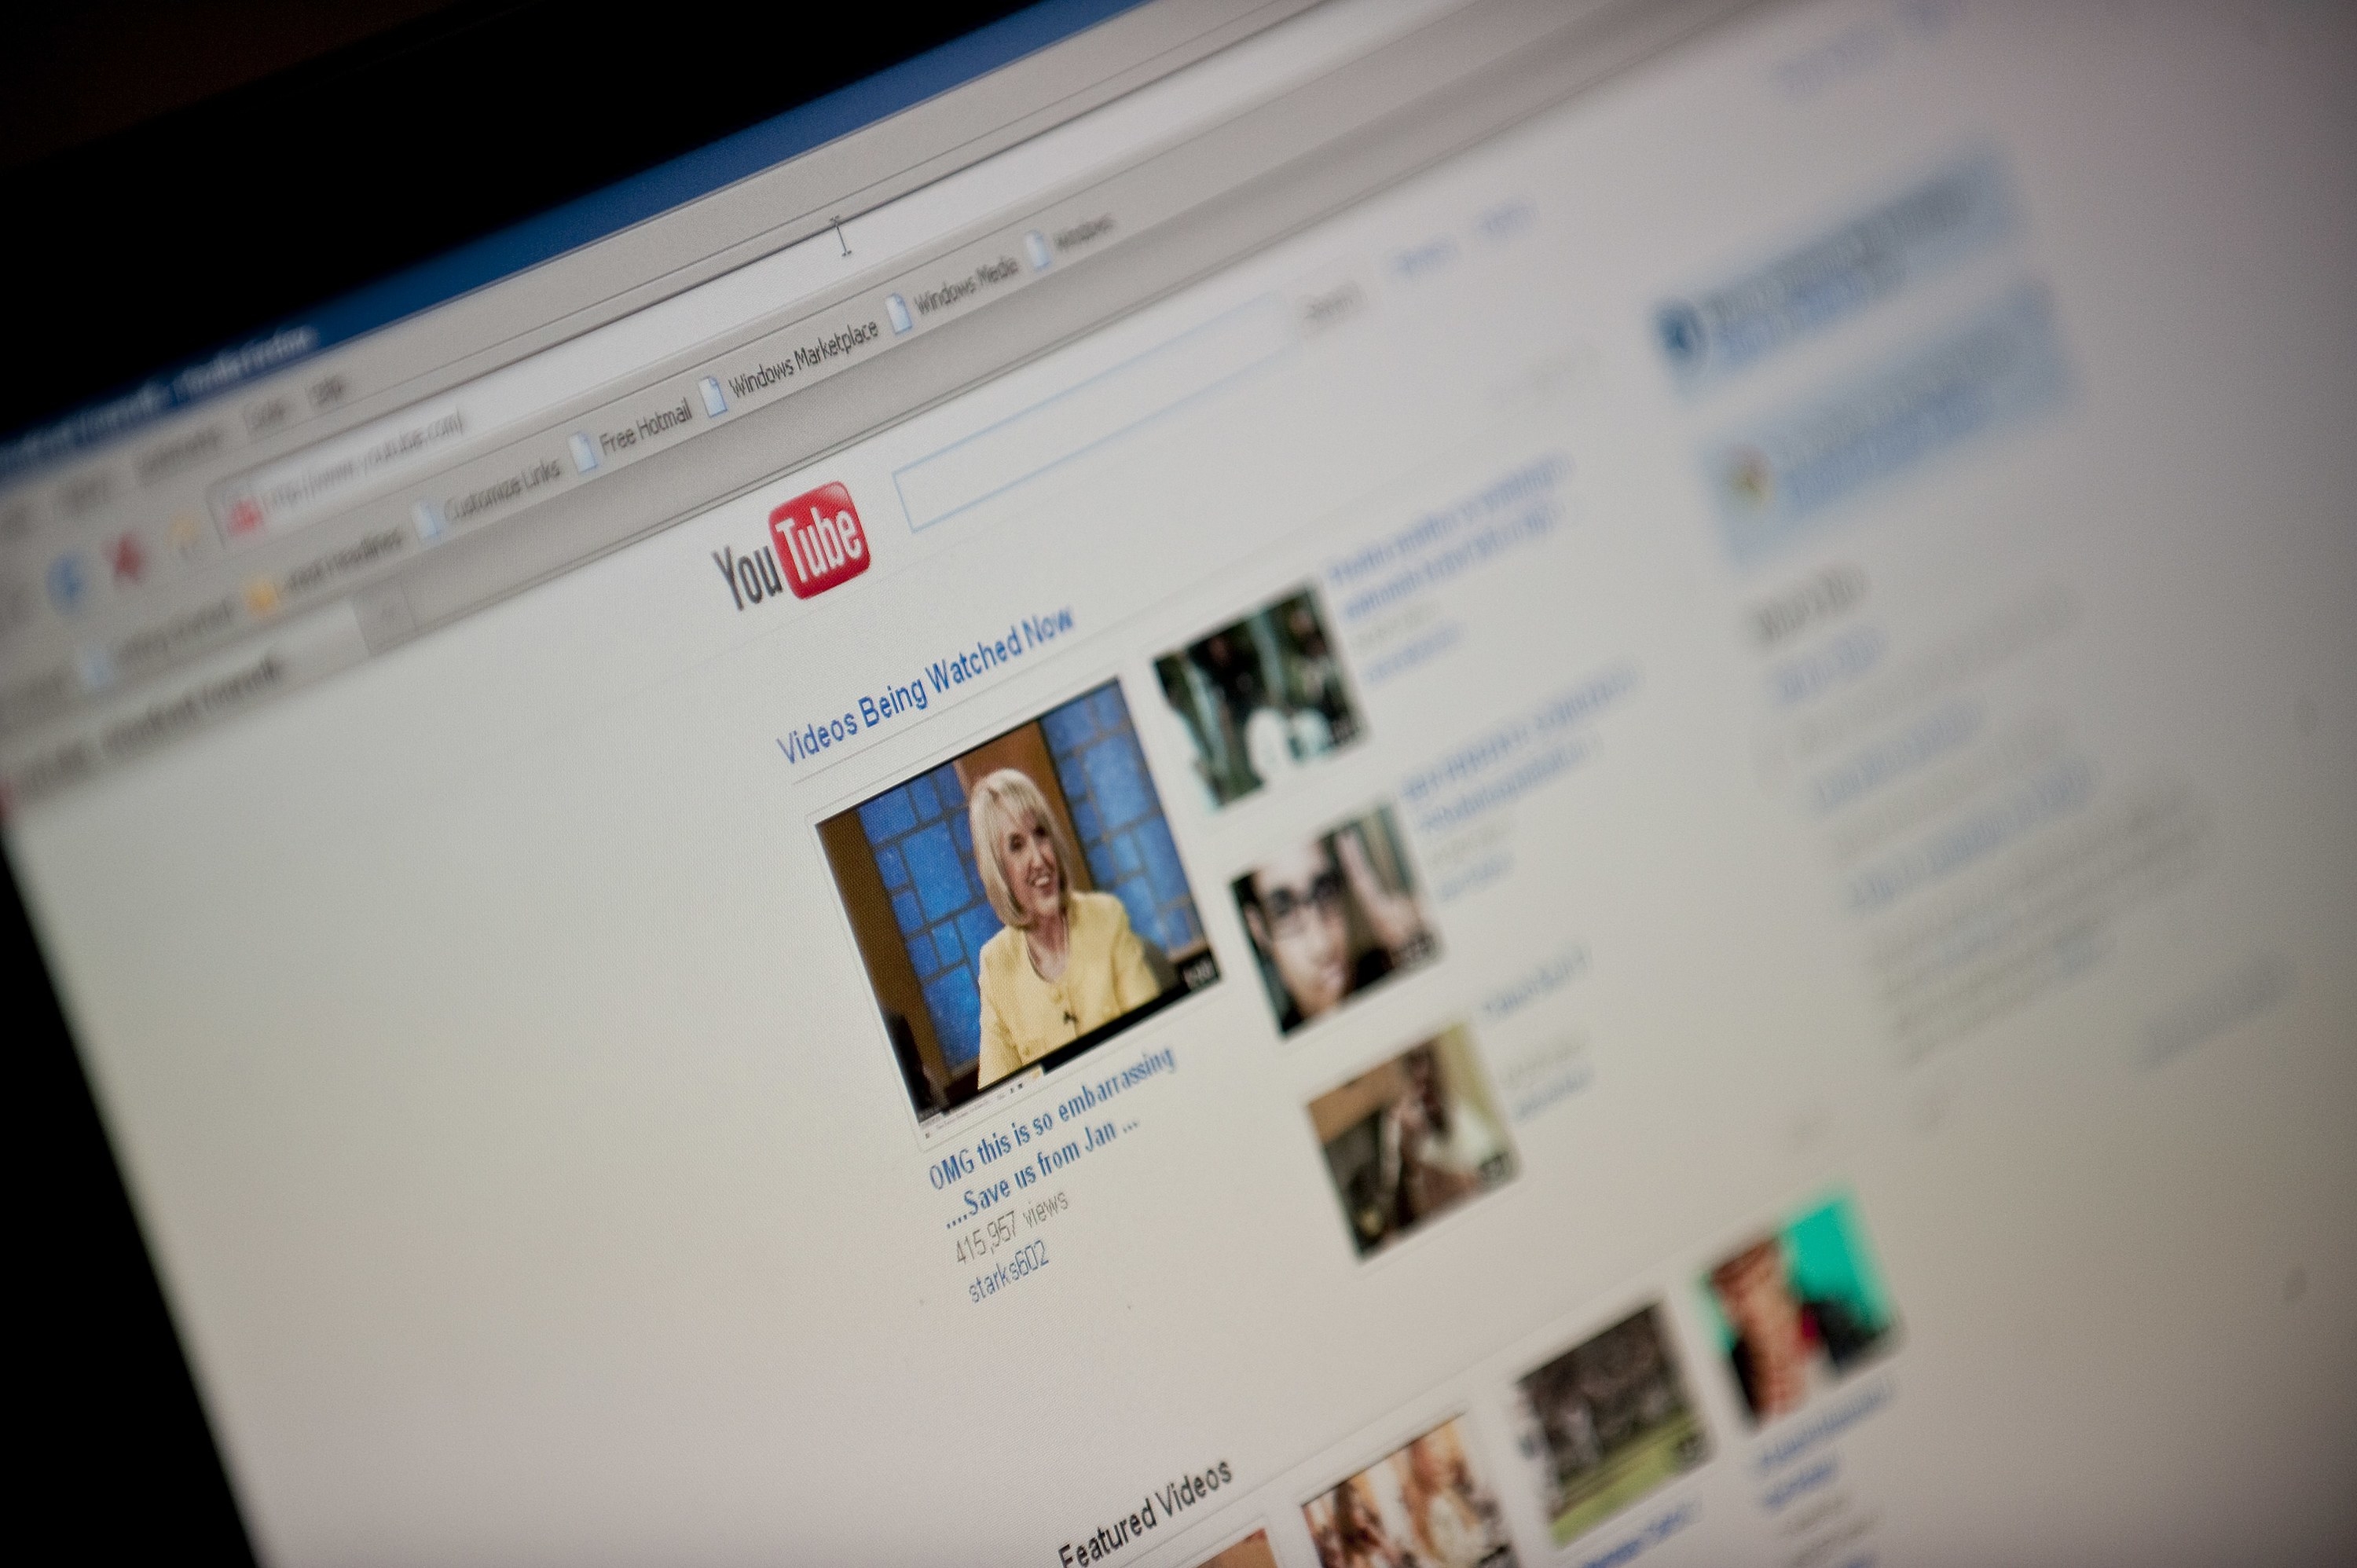 A photo of a computer screen open to the YouTube homepage circa 2010